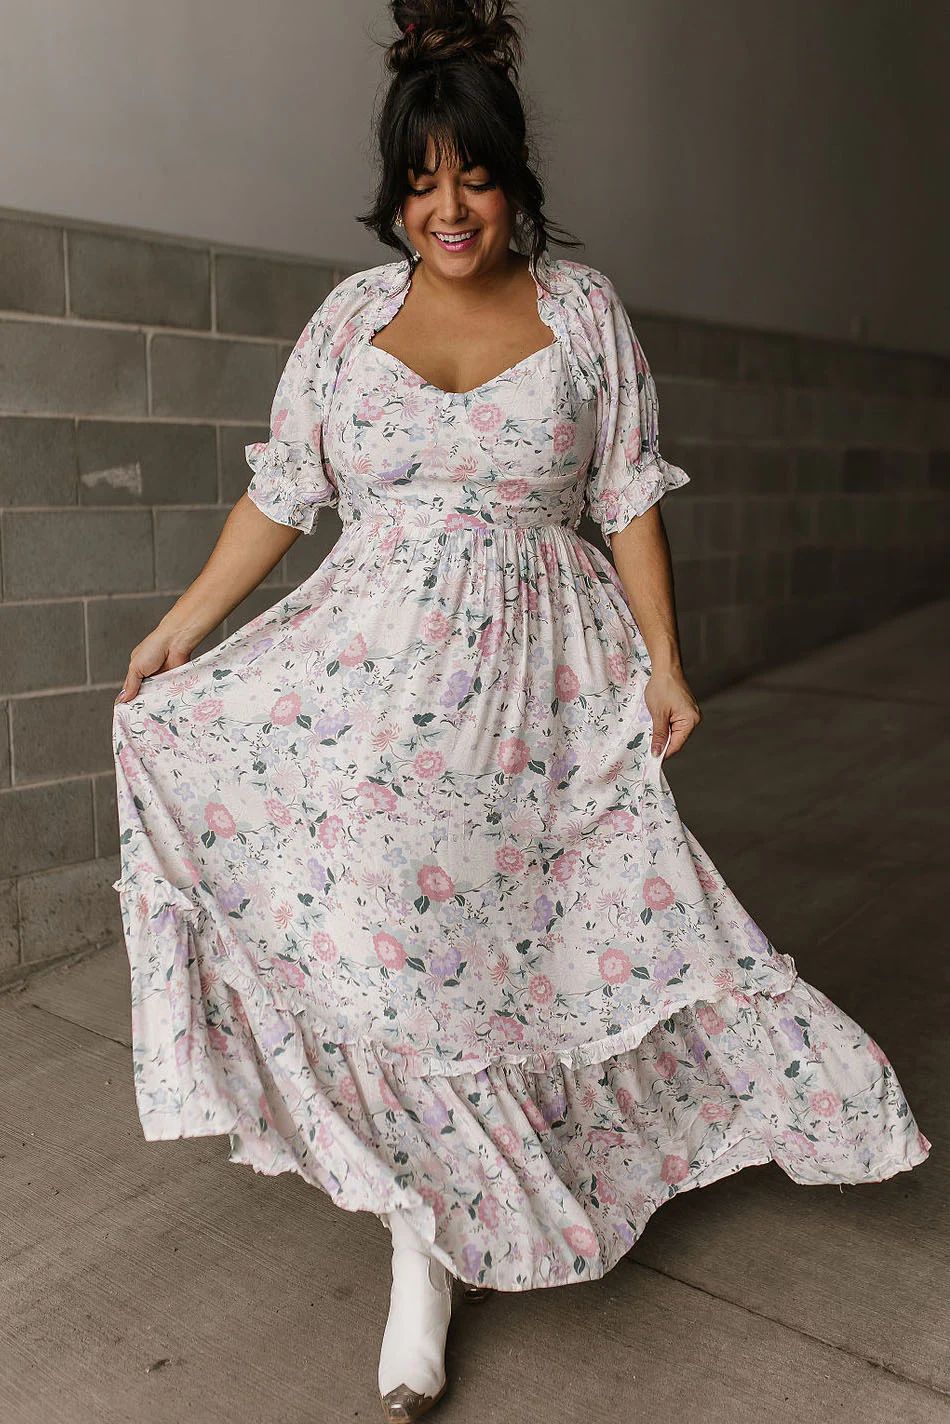 Floral Sweetheart Neckline Maxi Dress with Puff Sleeves | Lottie Maxi Dress | Mindy Mae's Market